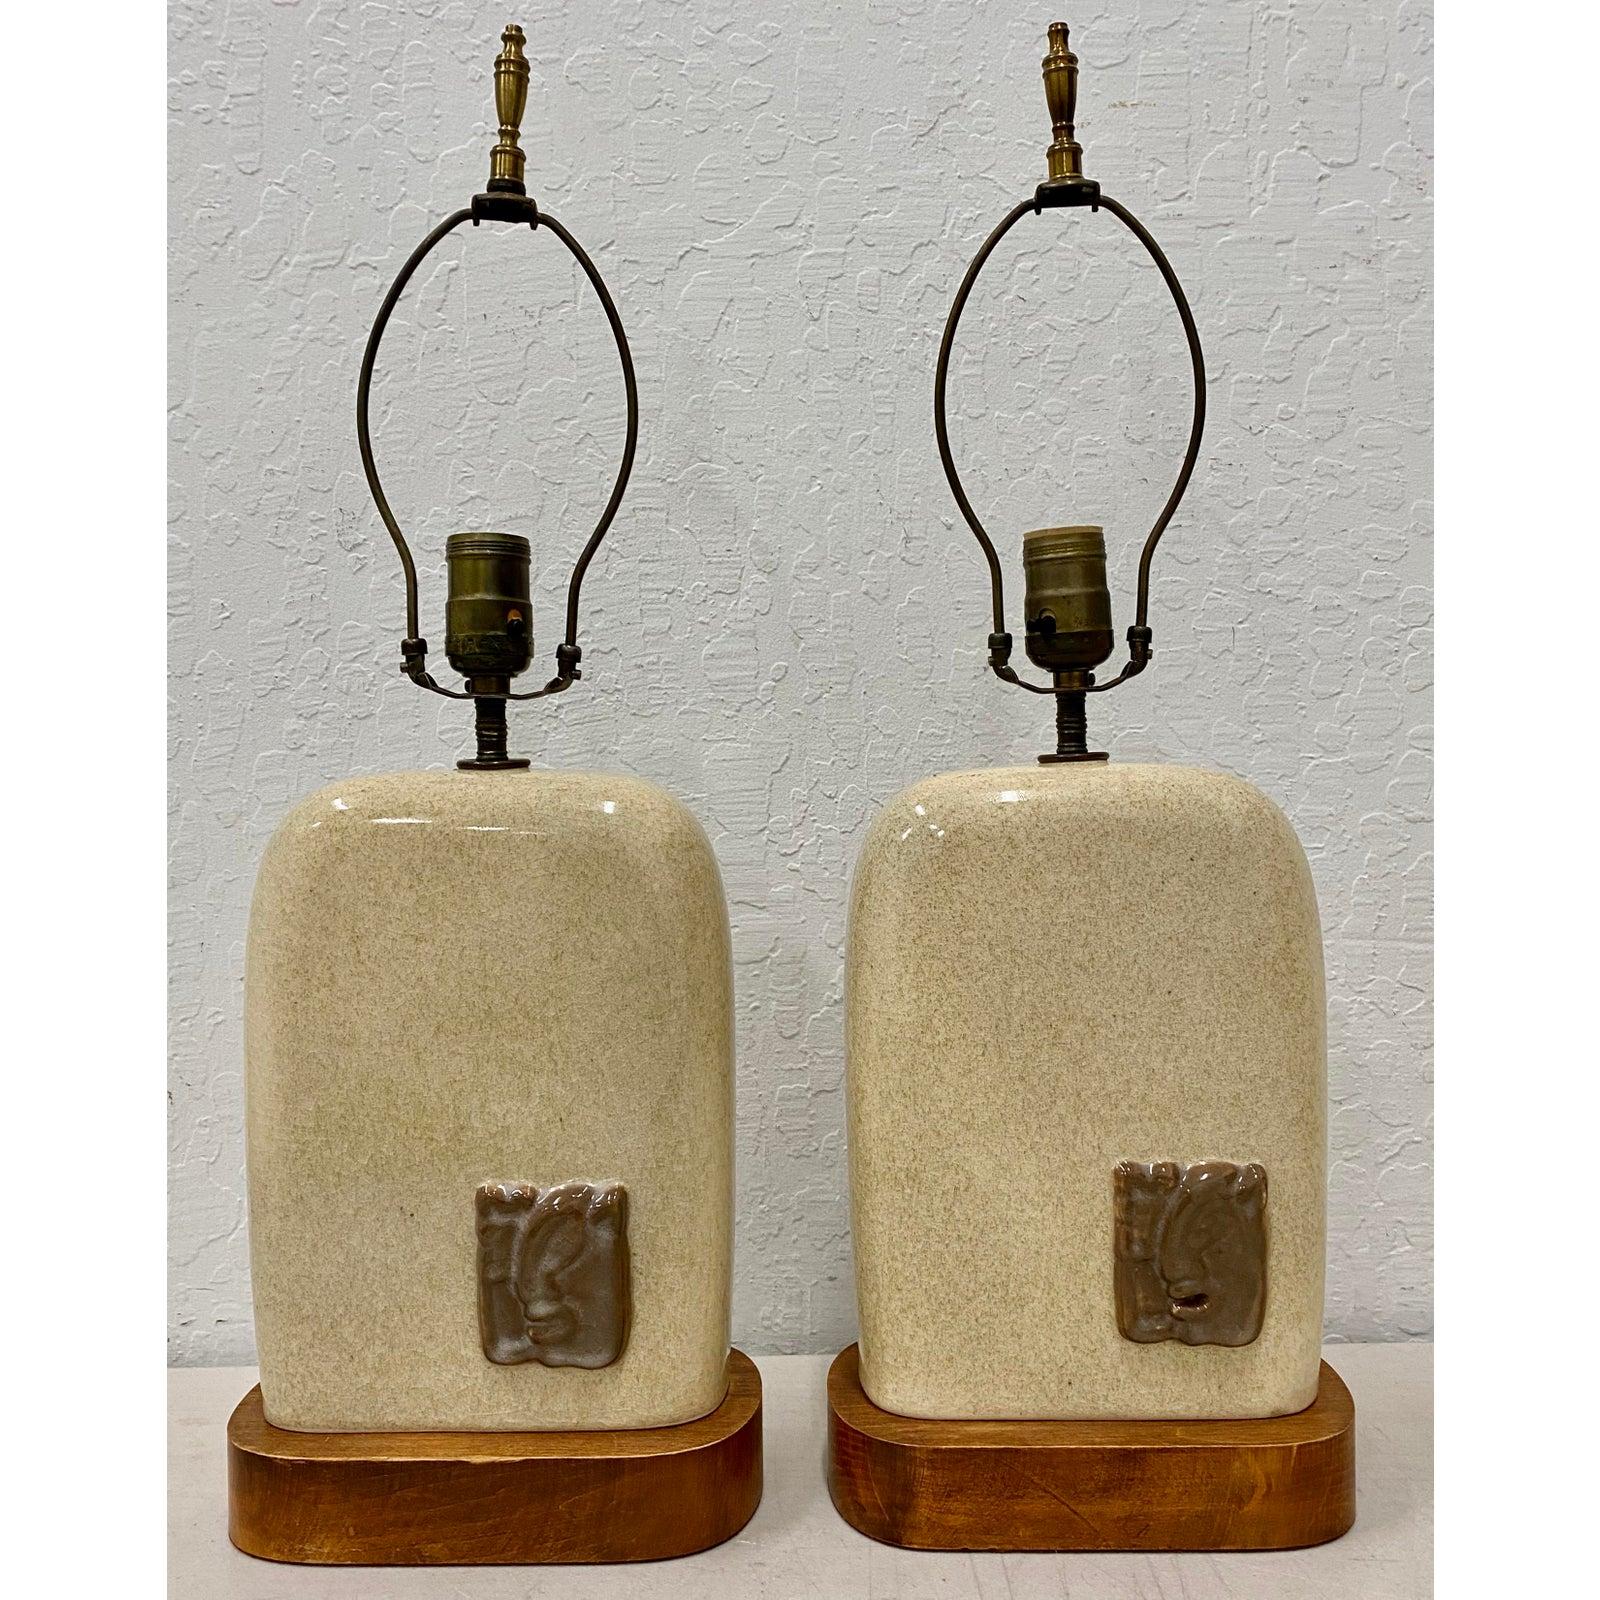 Pair of vintage glazed ceramic lamps with Mayan inspired ceramic medallions

Fantastic pair of vintage table lamps, circa 1940s-1950s.

A raised Mayan inspired medallion is on the front and back of each lamp.

The ceramic lamps sits atop